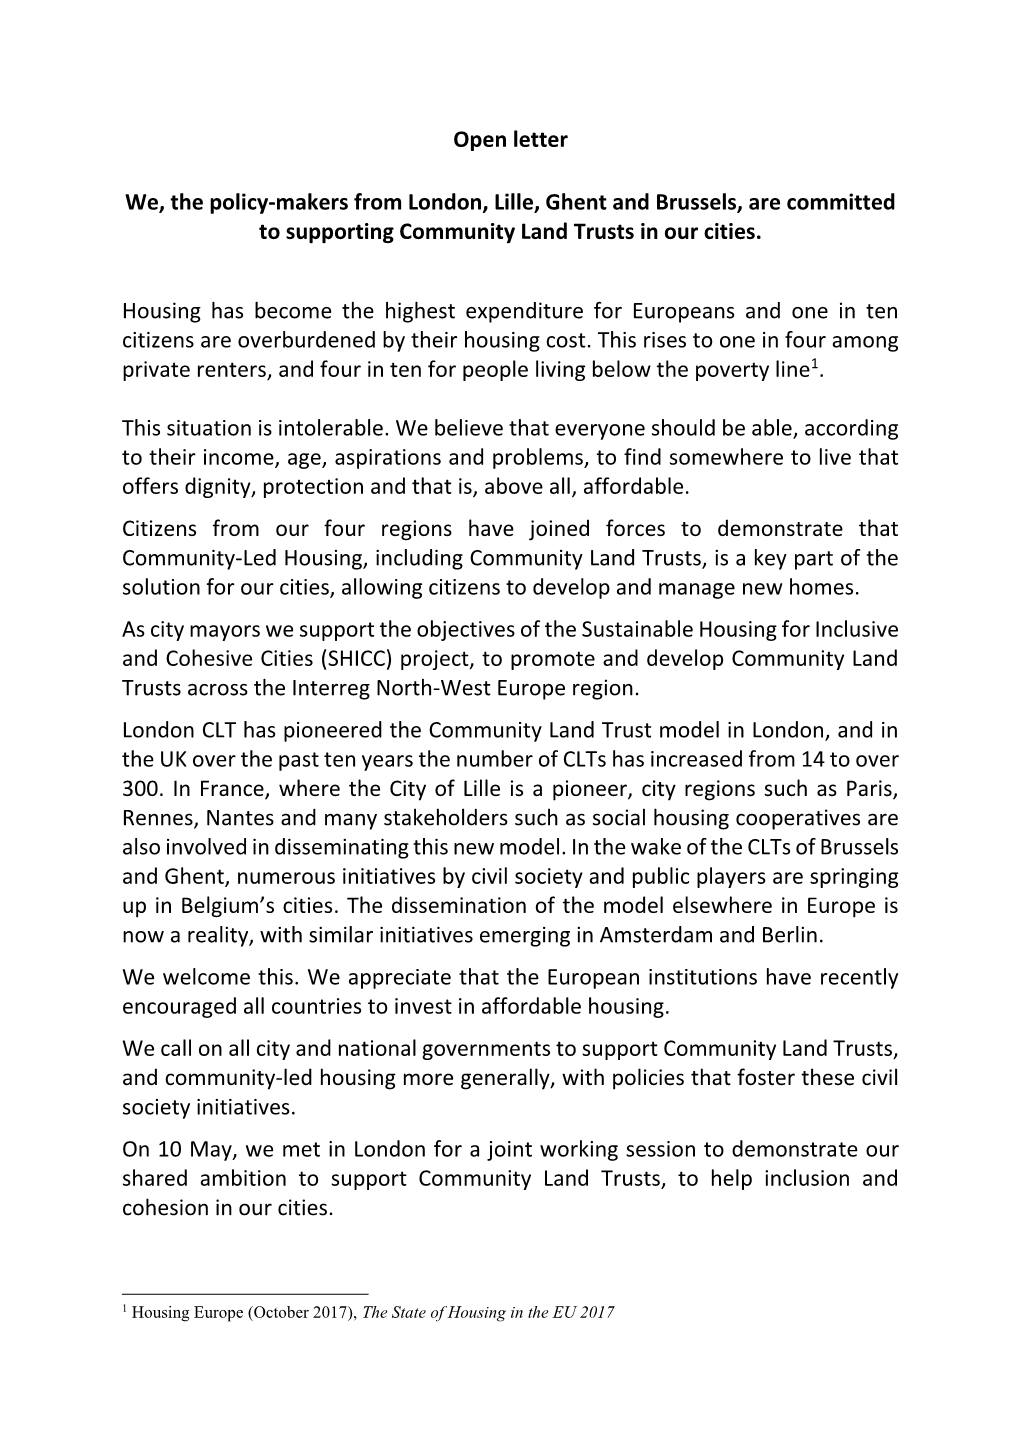 Open Letter We, the Policy-Makers from London, Lille, Ghent and Brussels, Are Committed to Supporting Community Land Trusts in O